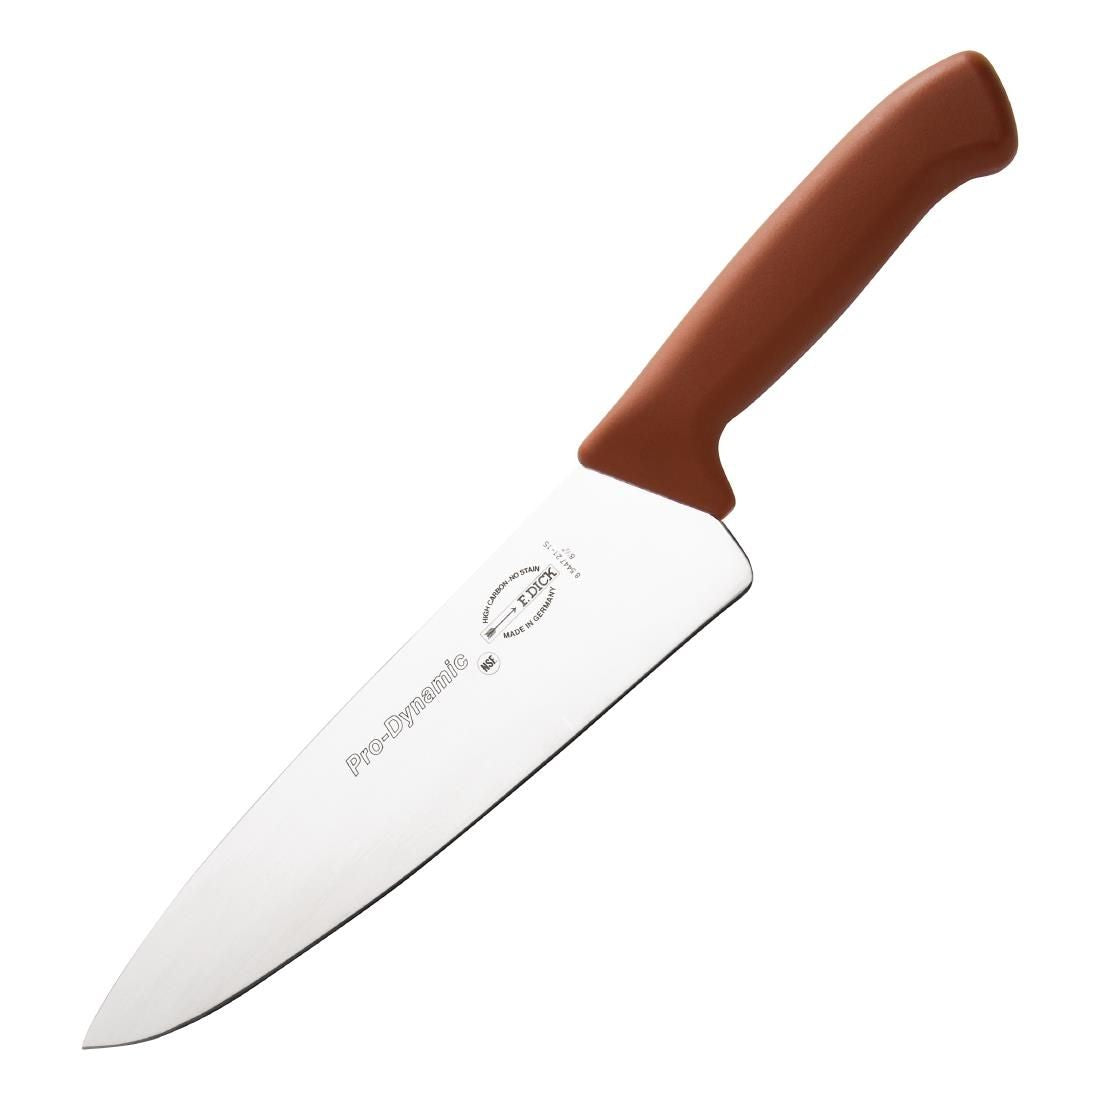 DL370 Dick Pro Dynamic HACCP Chefs Knife Brown 21.5cm JD Catering Equipment Solutions Ltd